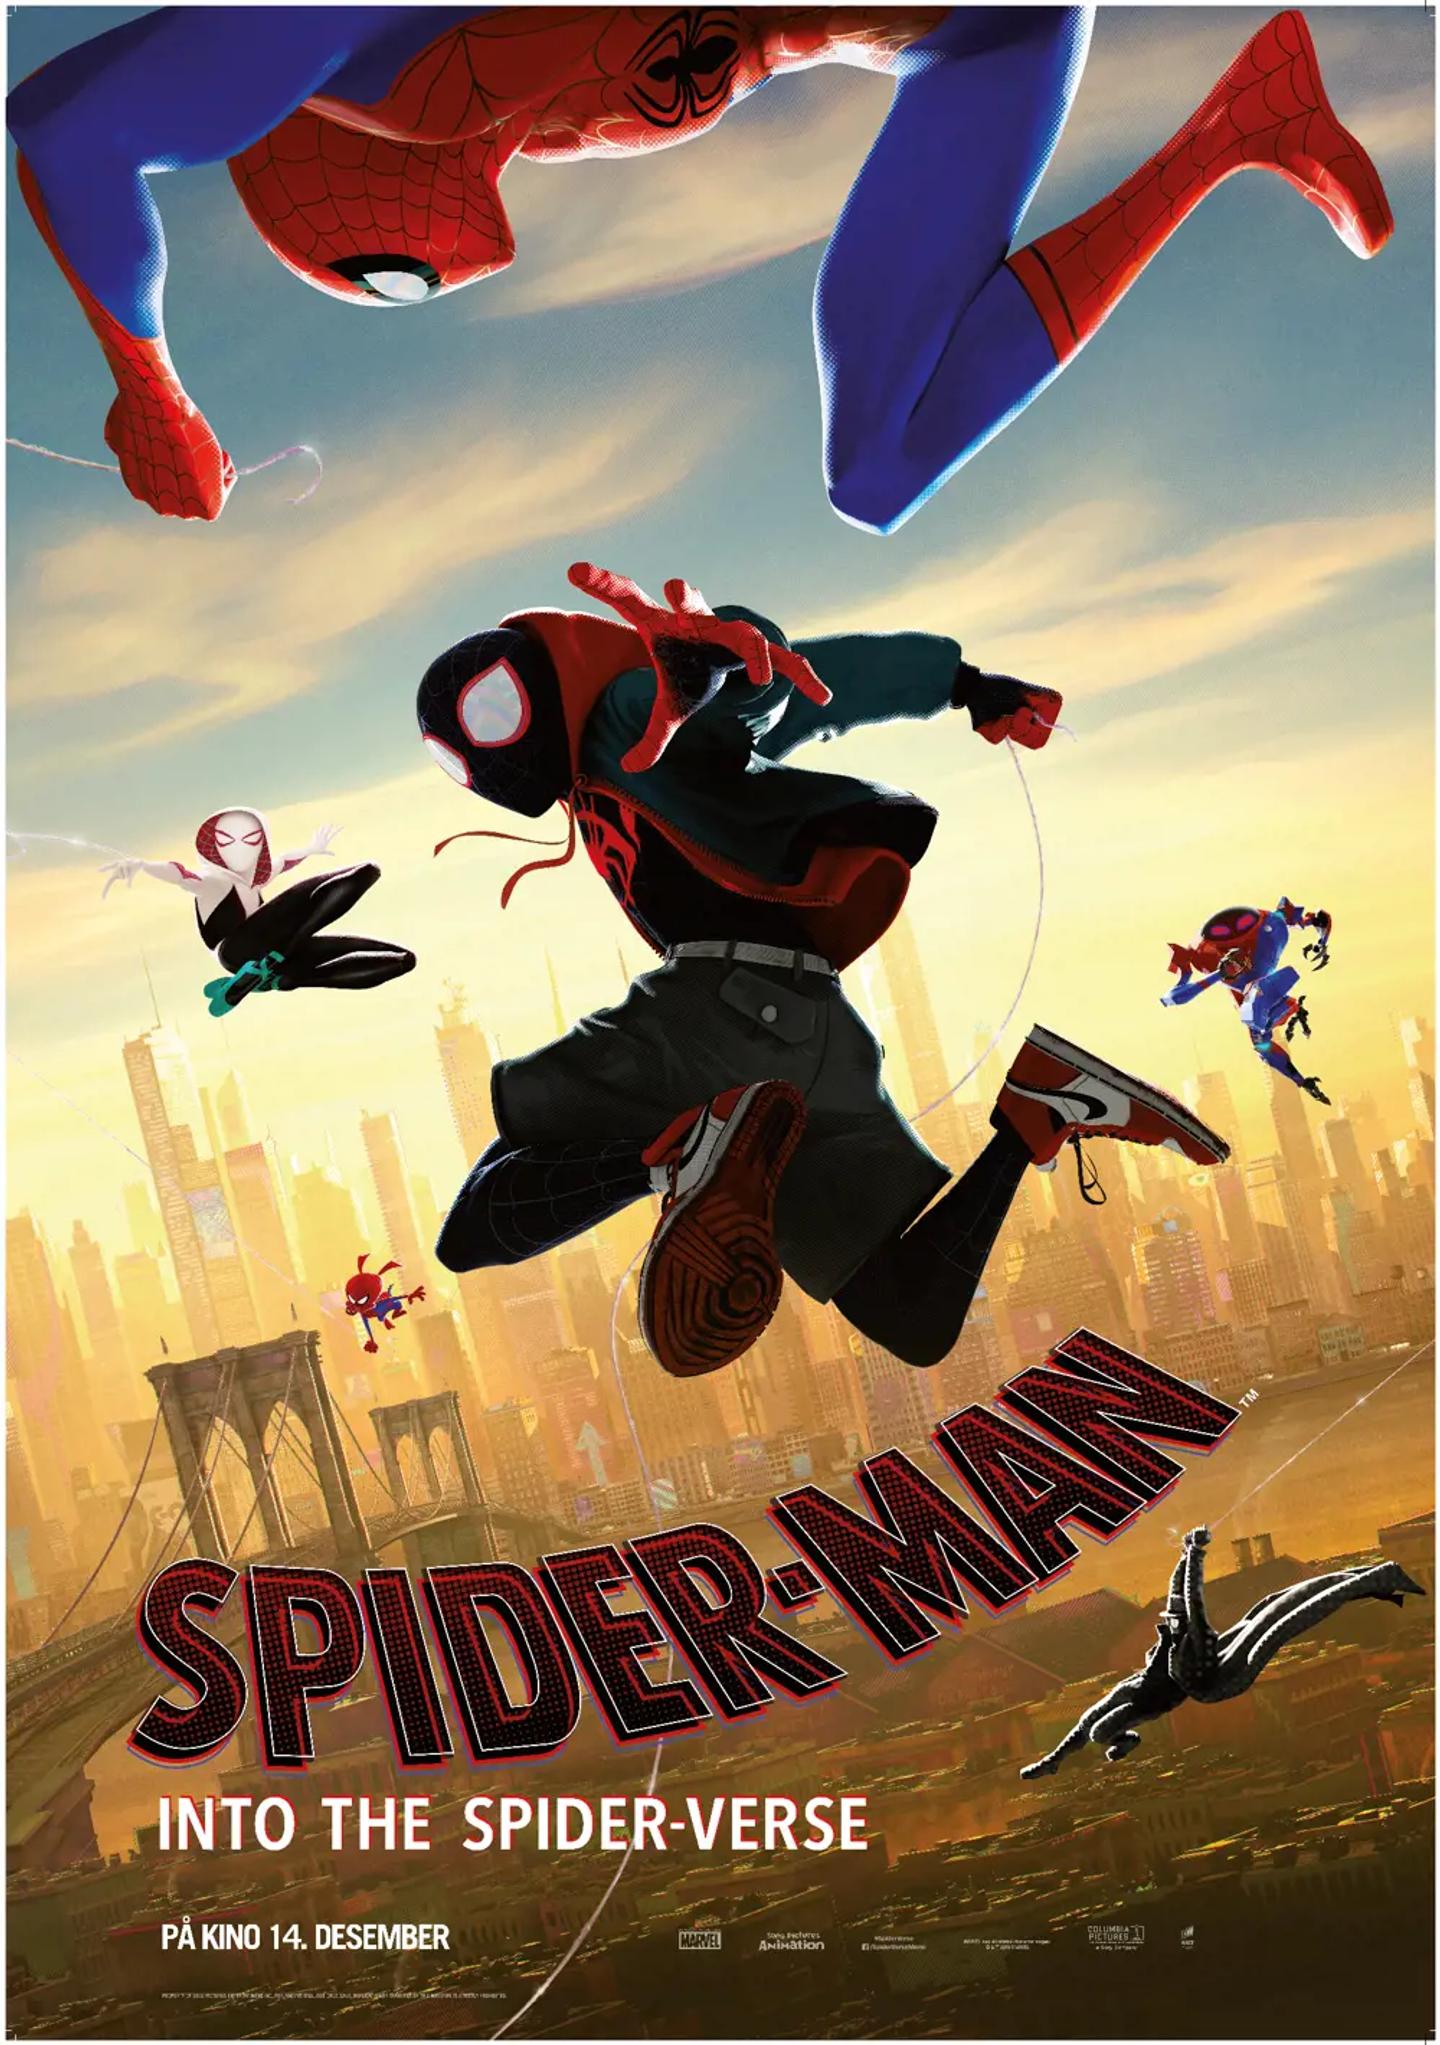 Plakat for 'Spider-Man: Into The Spider-Verse'